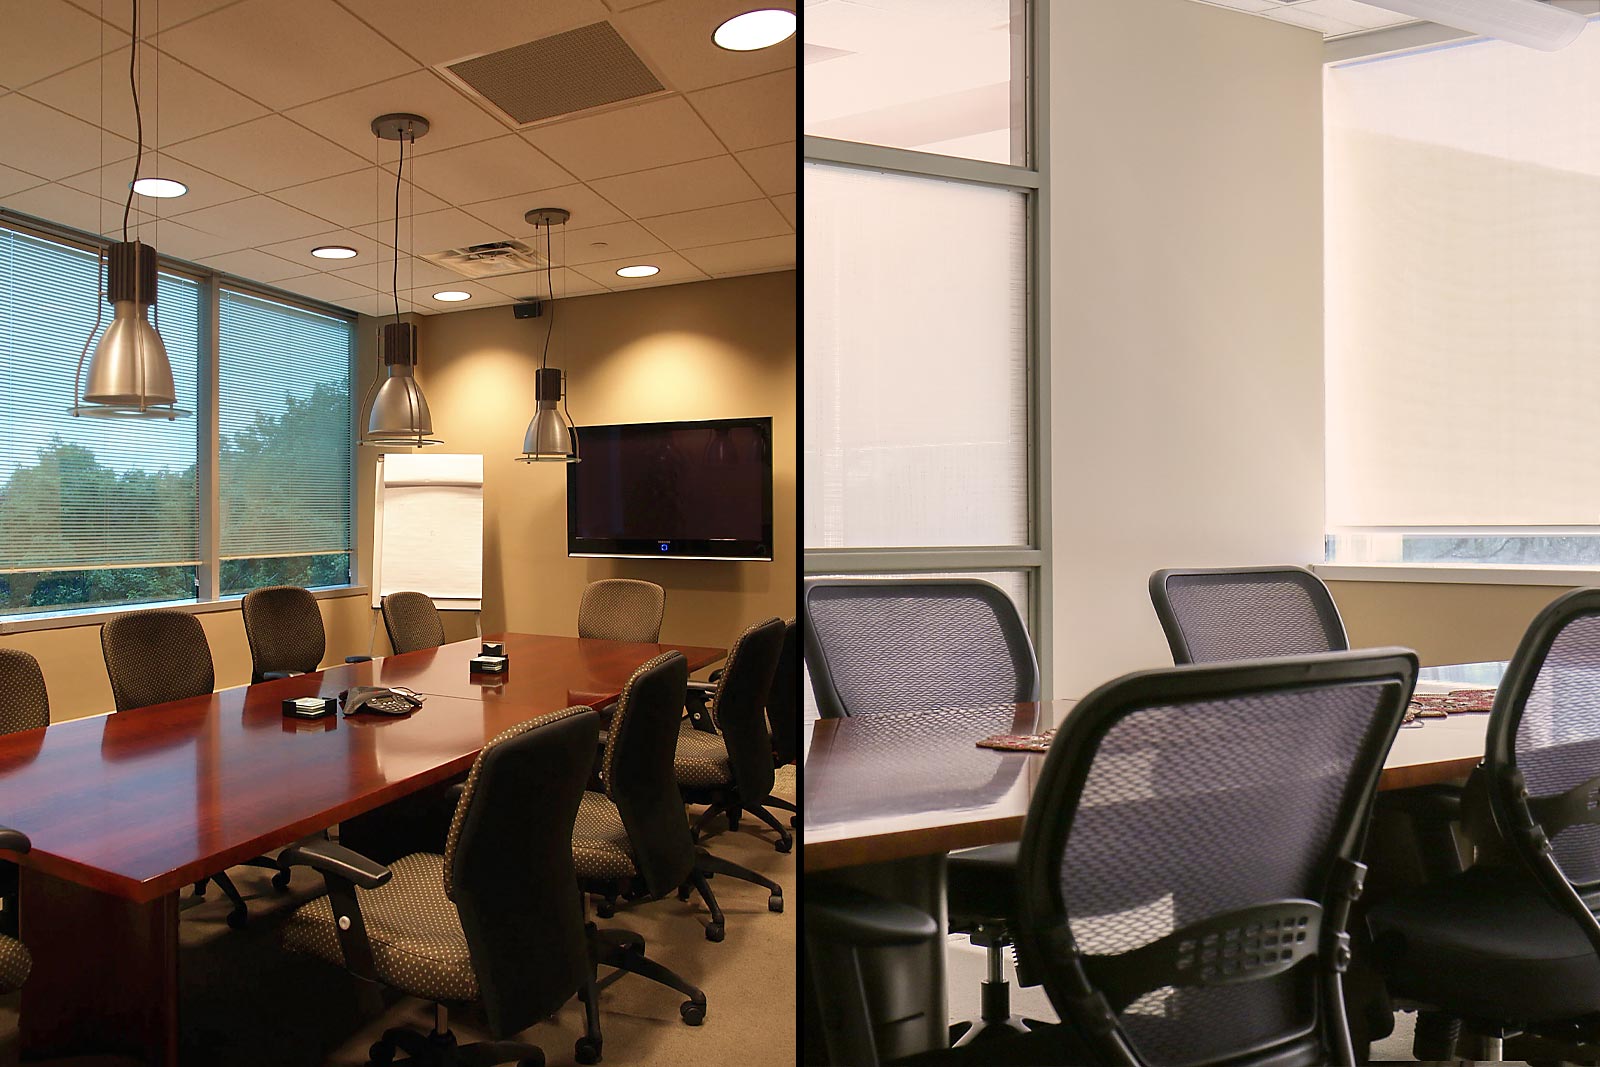 Third Floor Conference Rooms